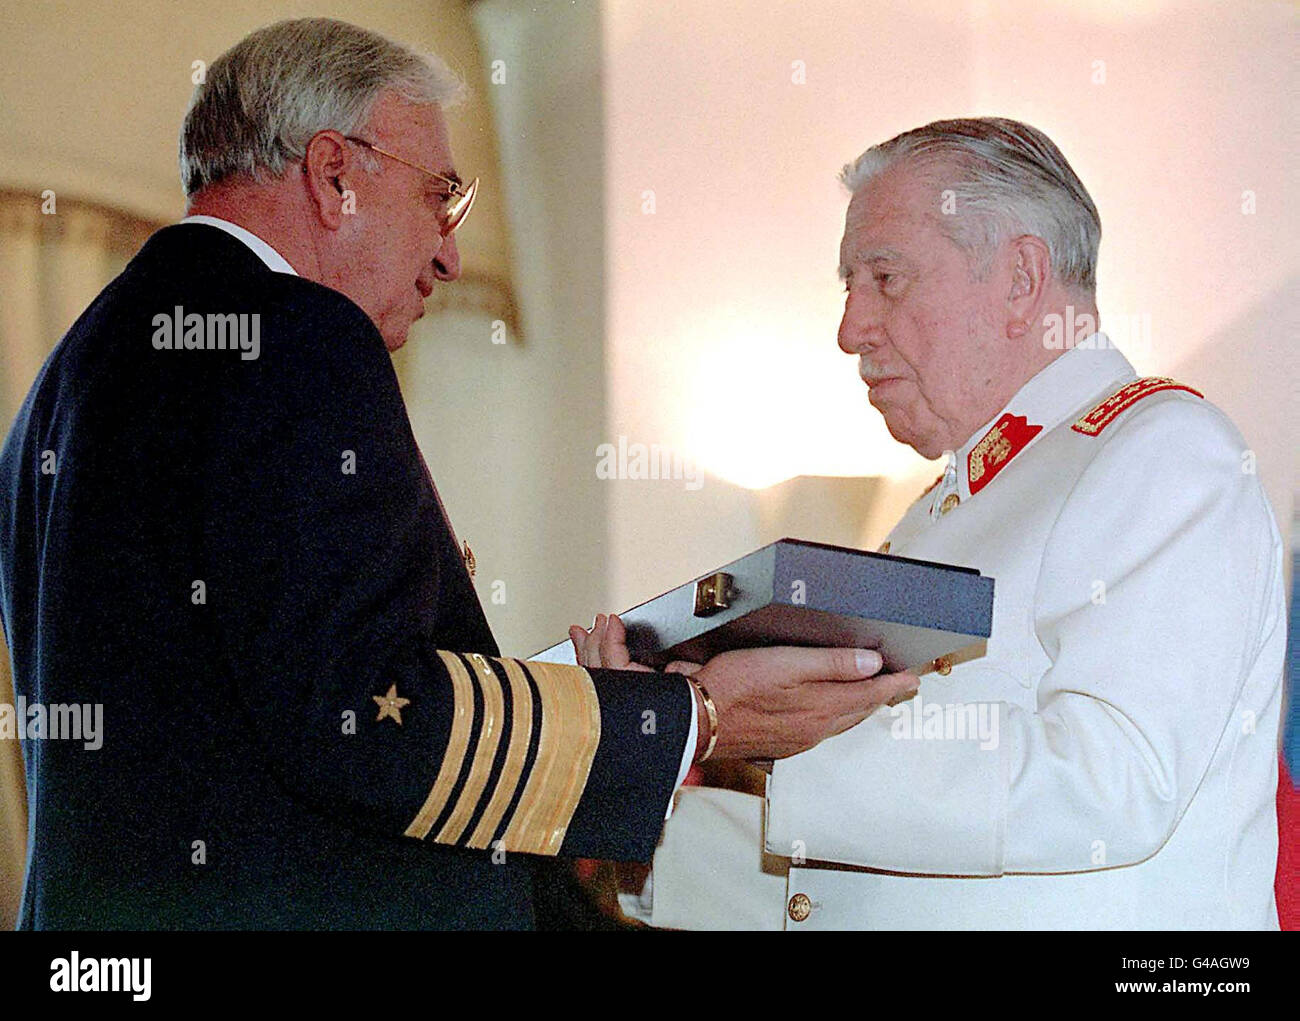 General Augusto Pinochet (R), commander of the Chilean Armed Forces, receives a ceremonial sword 28 January from Air Force General Fernando Rojas during a ceremony in Santiago honoring the Chilean strongman. He is scheduled to retire from his post in March and take up a lifetime seat in the Chilean senate. PA NEWS PHOTO Stock Photo